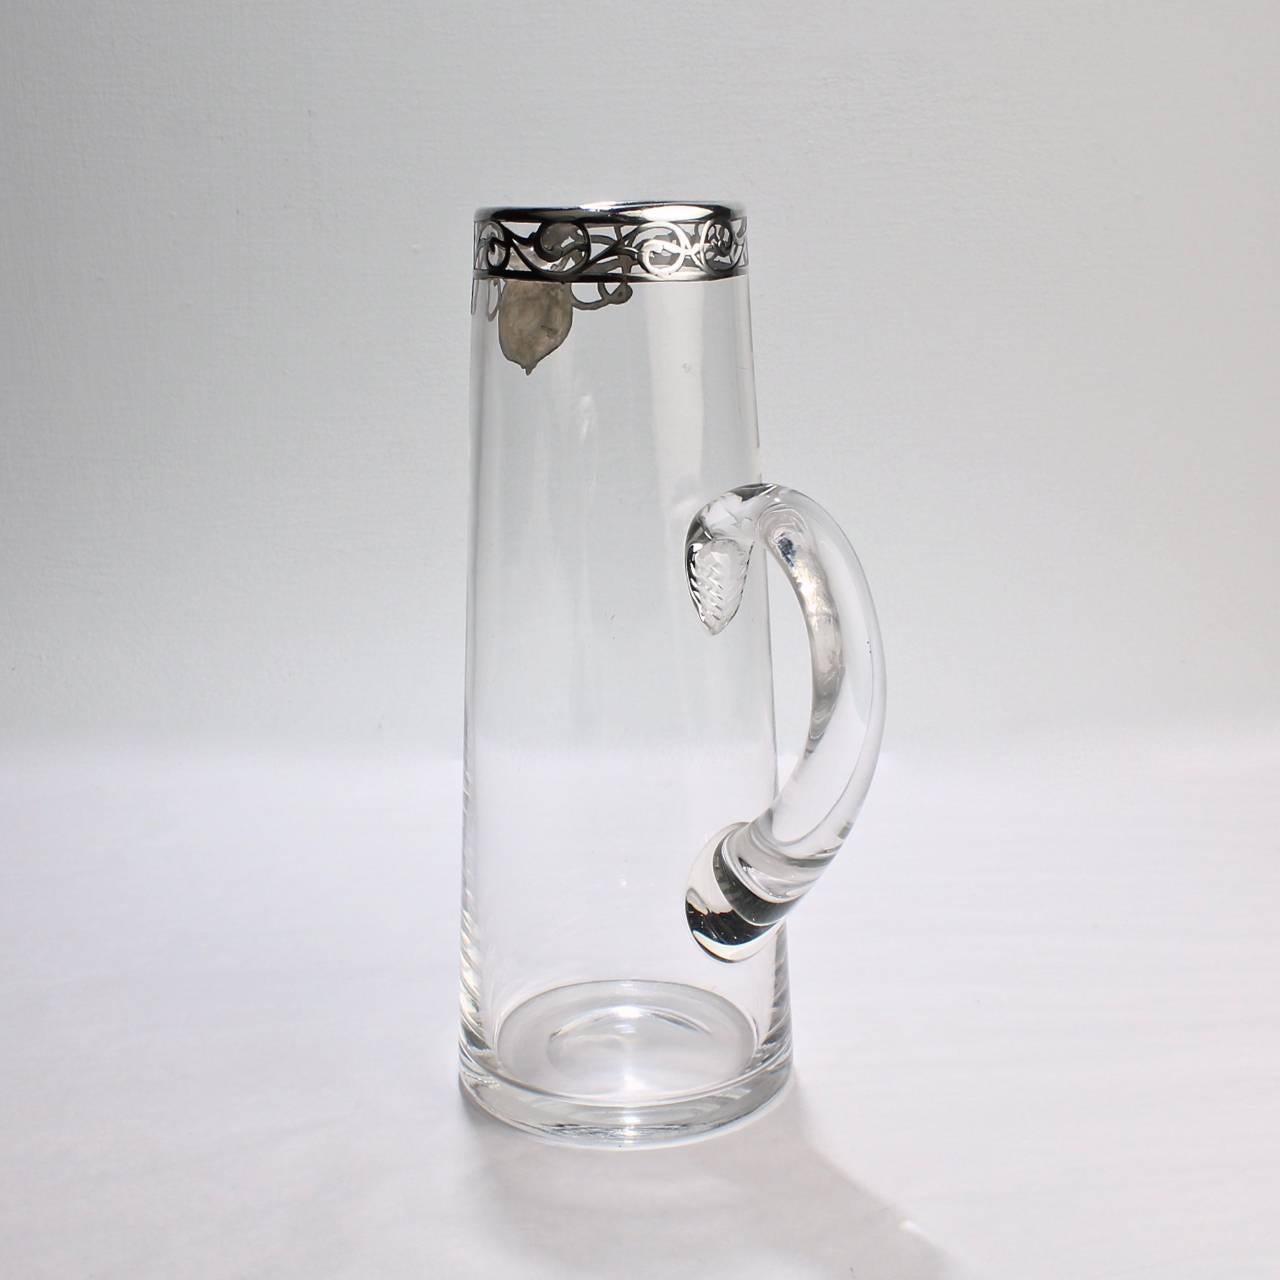 An early 20th century Art Noveau silver overlay glass cocktail pitcher.

With applied C shaped applied handle and silver overlay encircling the top rim.

Base with a polished pontil. Top rim marked Sterling 114.

Height: ca. 10 in.

Items